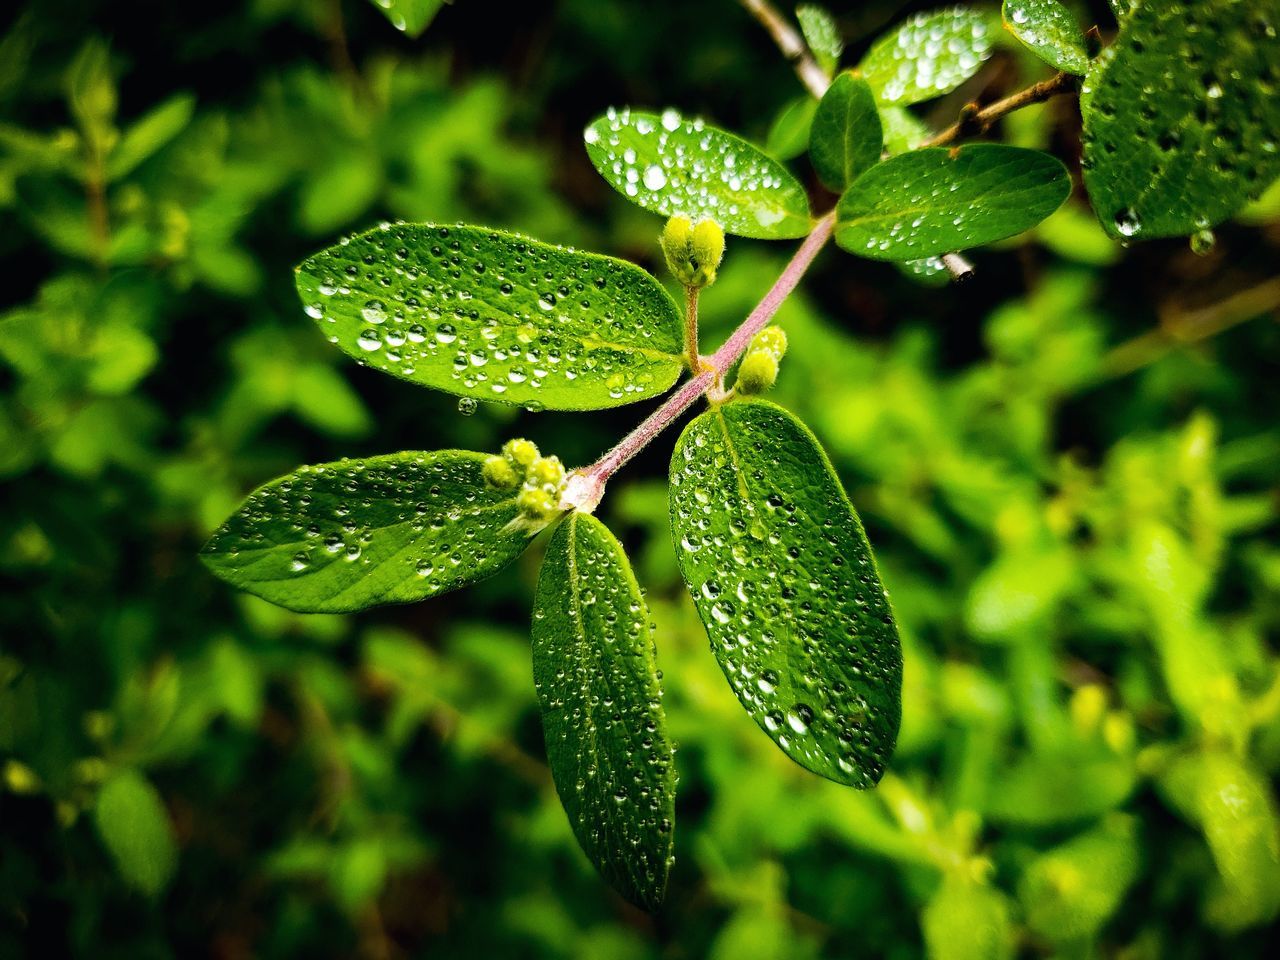 green color, growth, plant, leaf, plant part, close-up, beauty in nature, nature, focus on foreground, no people, day, freshness, water, outdoors, vulnerability, tranquility, selective focus, drop, fragility, leaves, raindrop